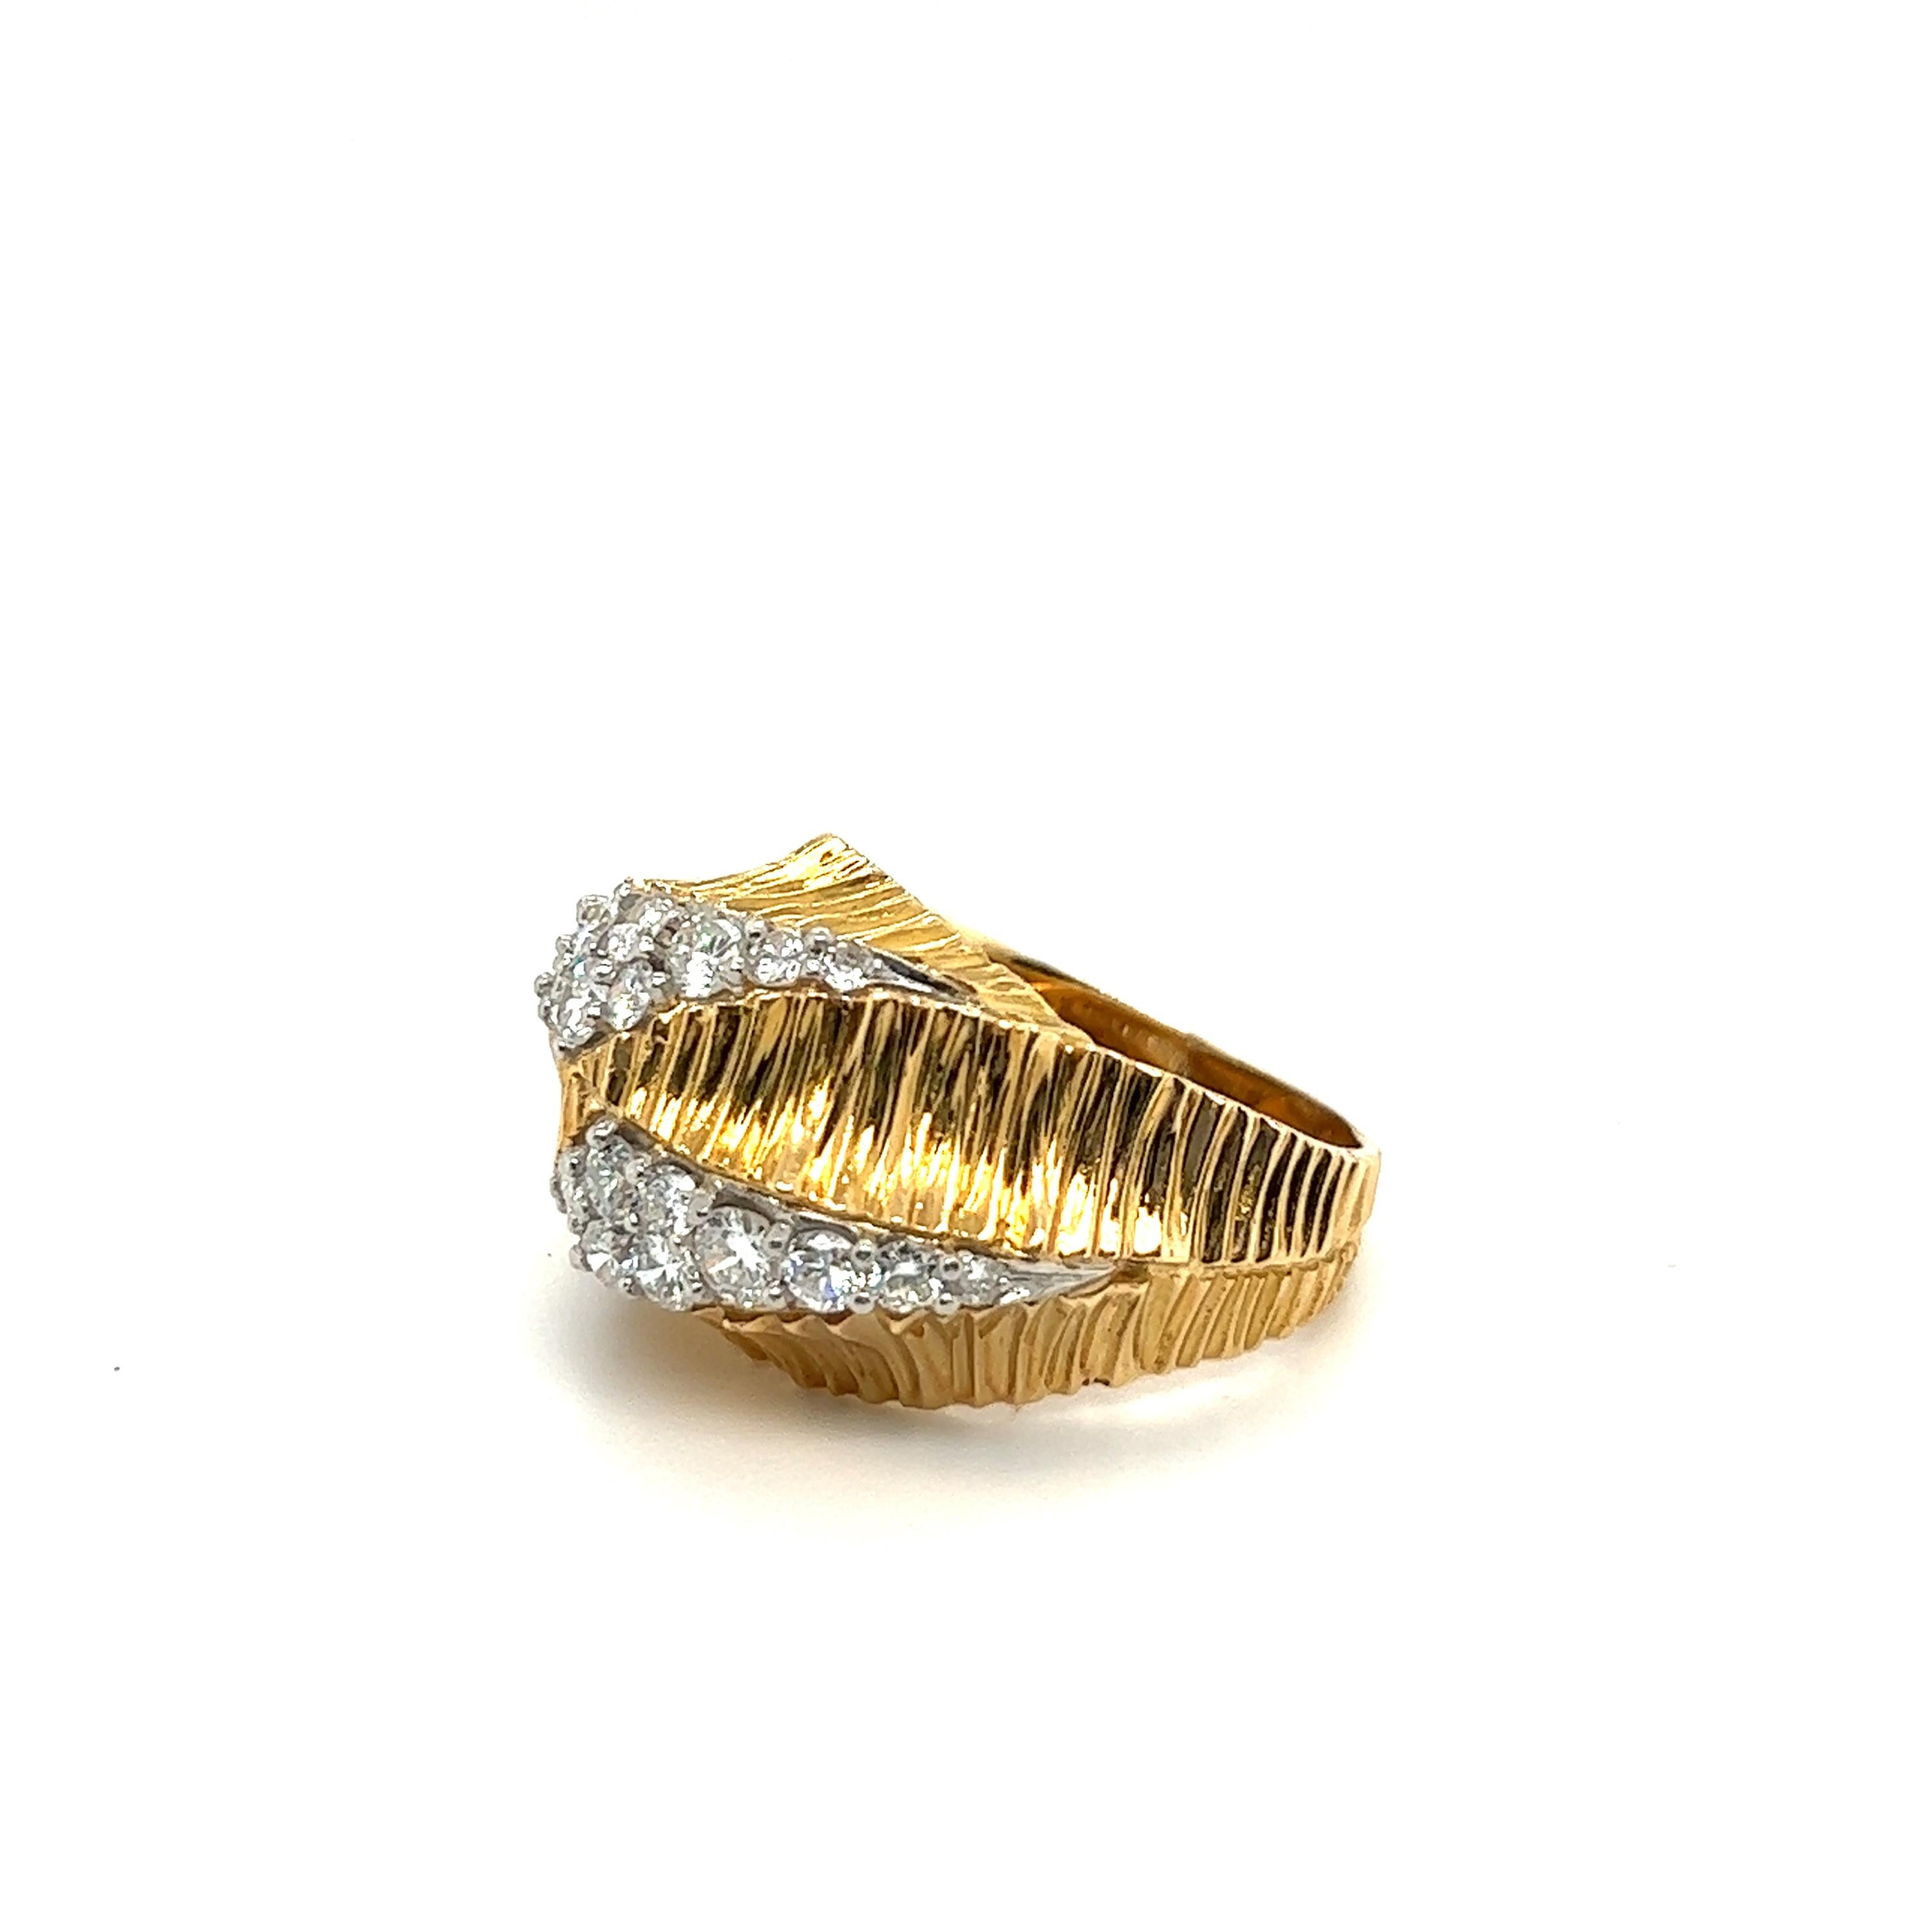 Architectural 18 karat yellow gold and diamond French cocktail ring, 1970s.
Asymetrically crafted in 18 karat yellow gold, this eye-catching ring is set with brilliant-cut diamonds totalling approximately 1.5 carats. The finely structured appearance